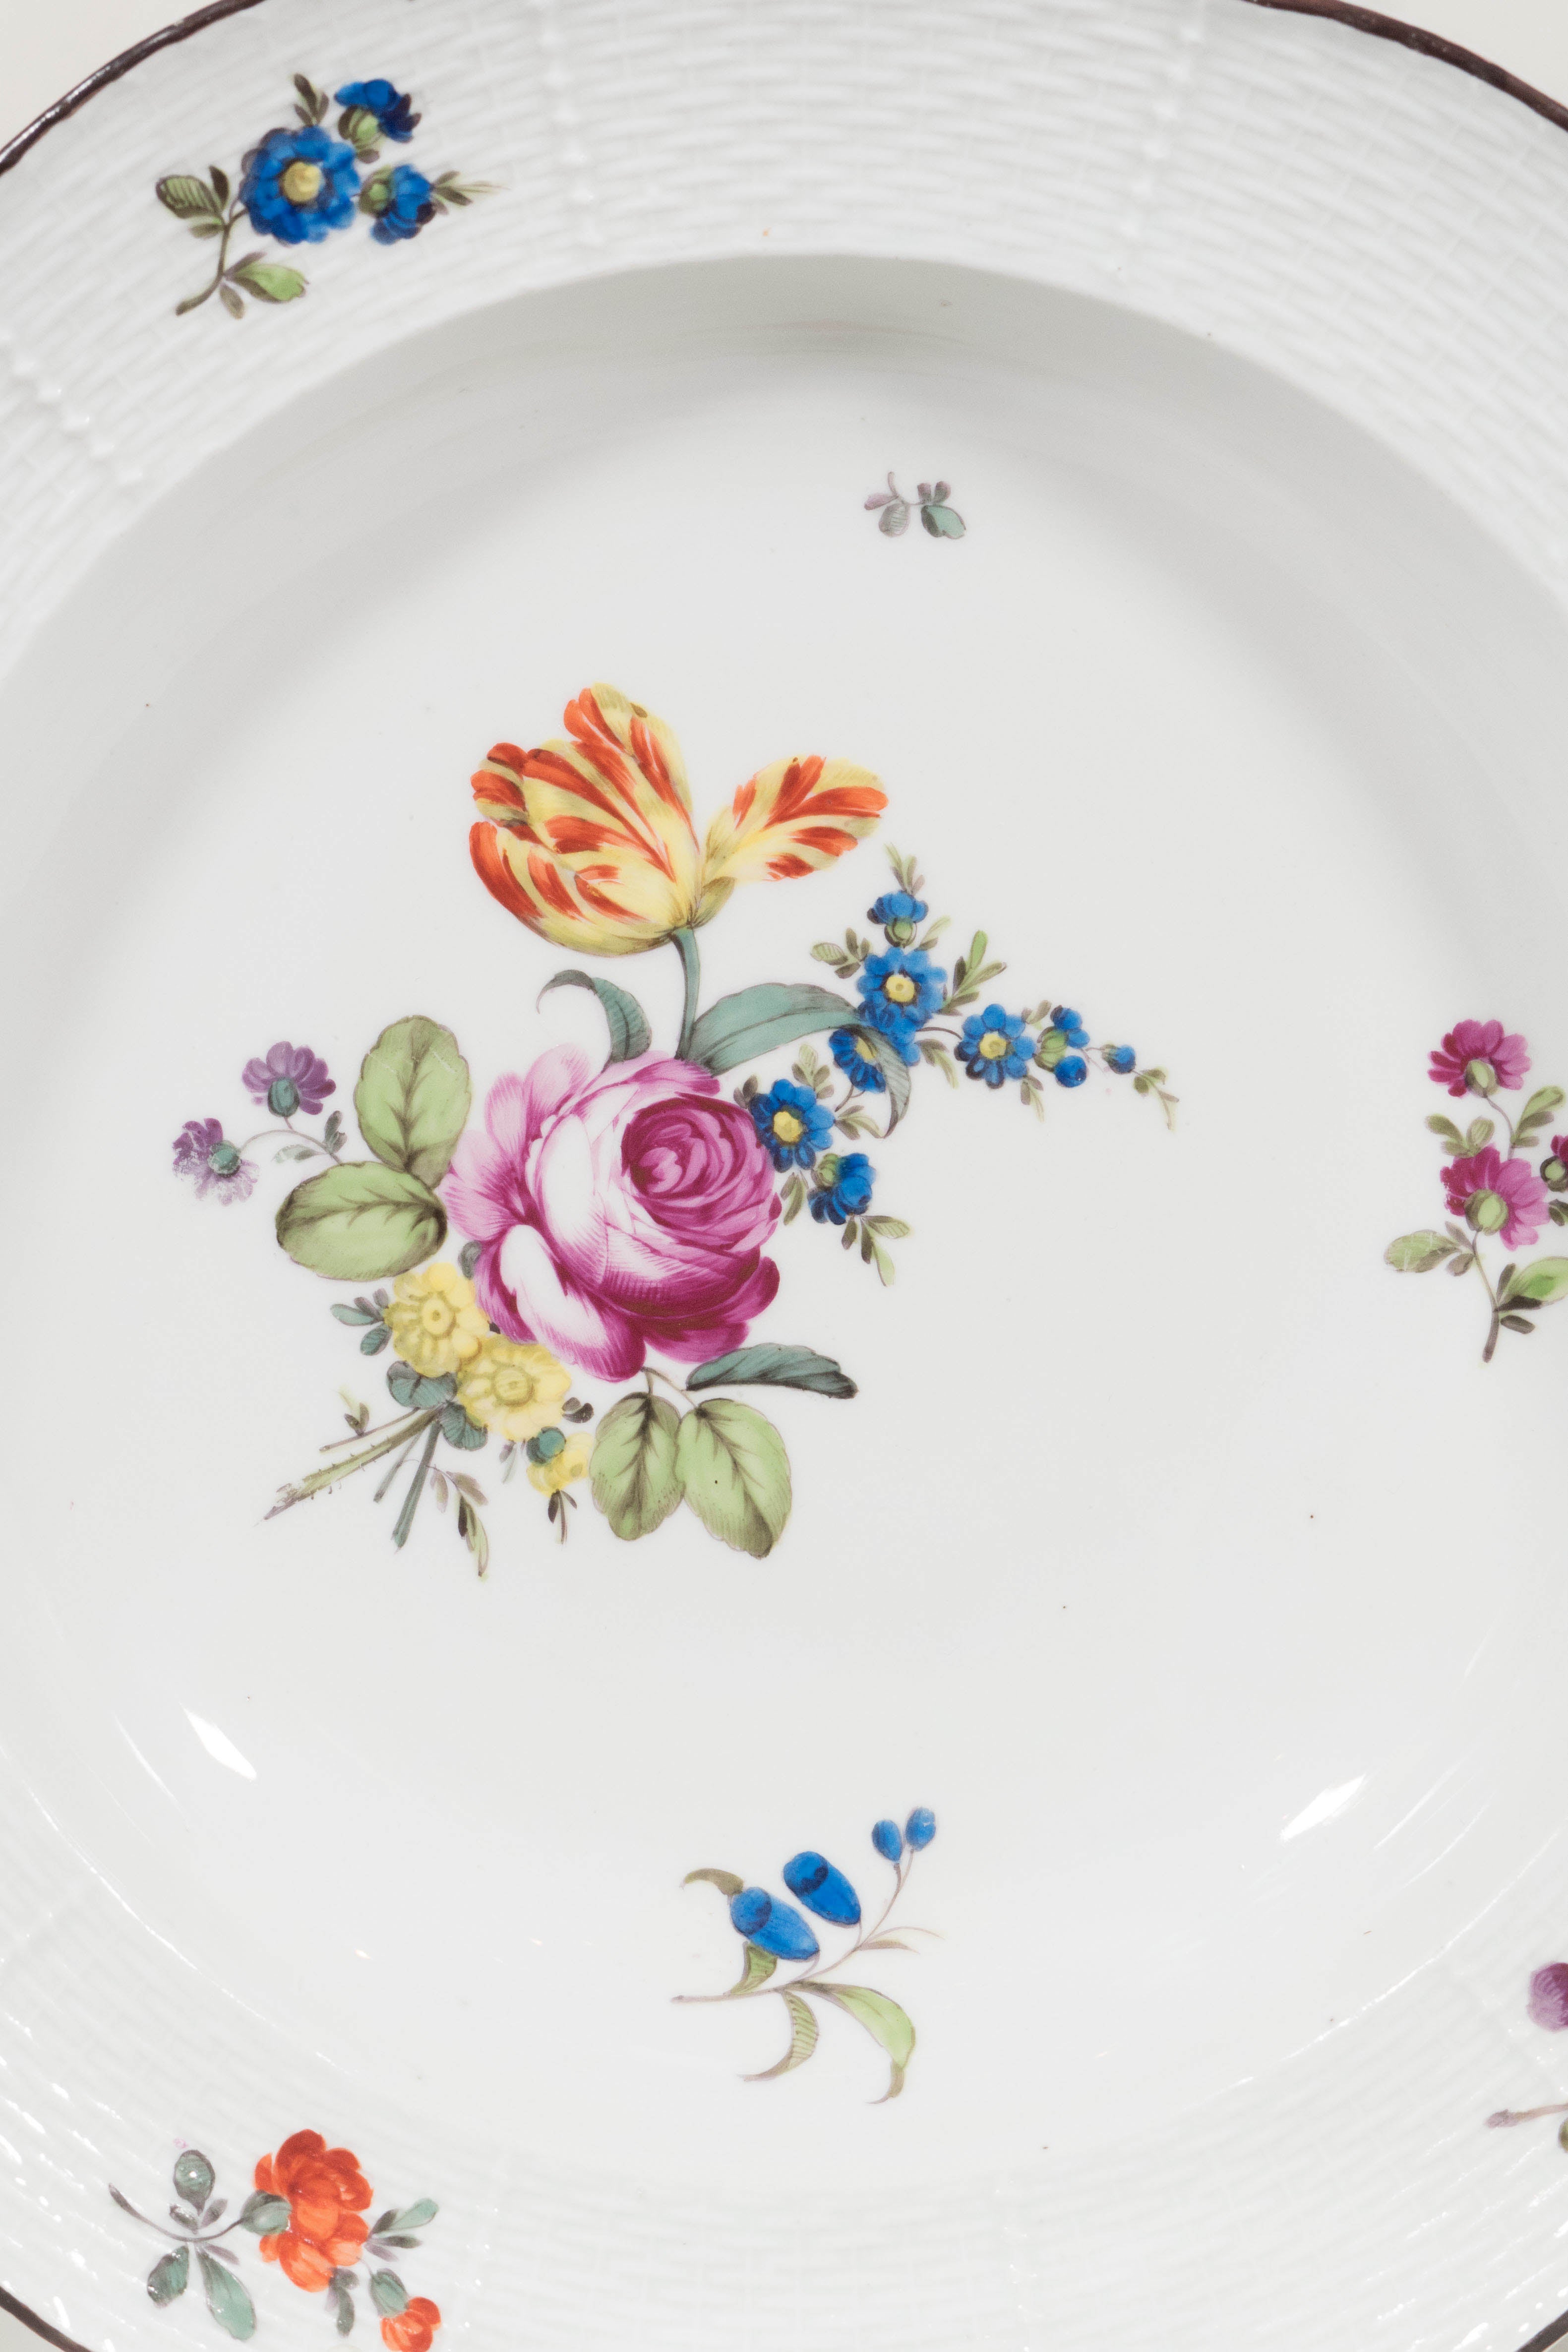 A set of a dozen mid-18th century Vienna hard-paste porcelain plates beautifully hand-painted in enamels with one large bouquet and detached sprays of roses and other flowers. The ozier border with a band of fine basketwork and a brown-line lobed